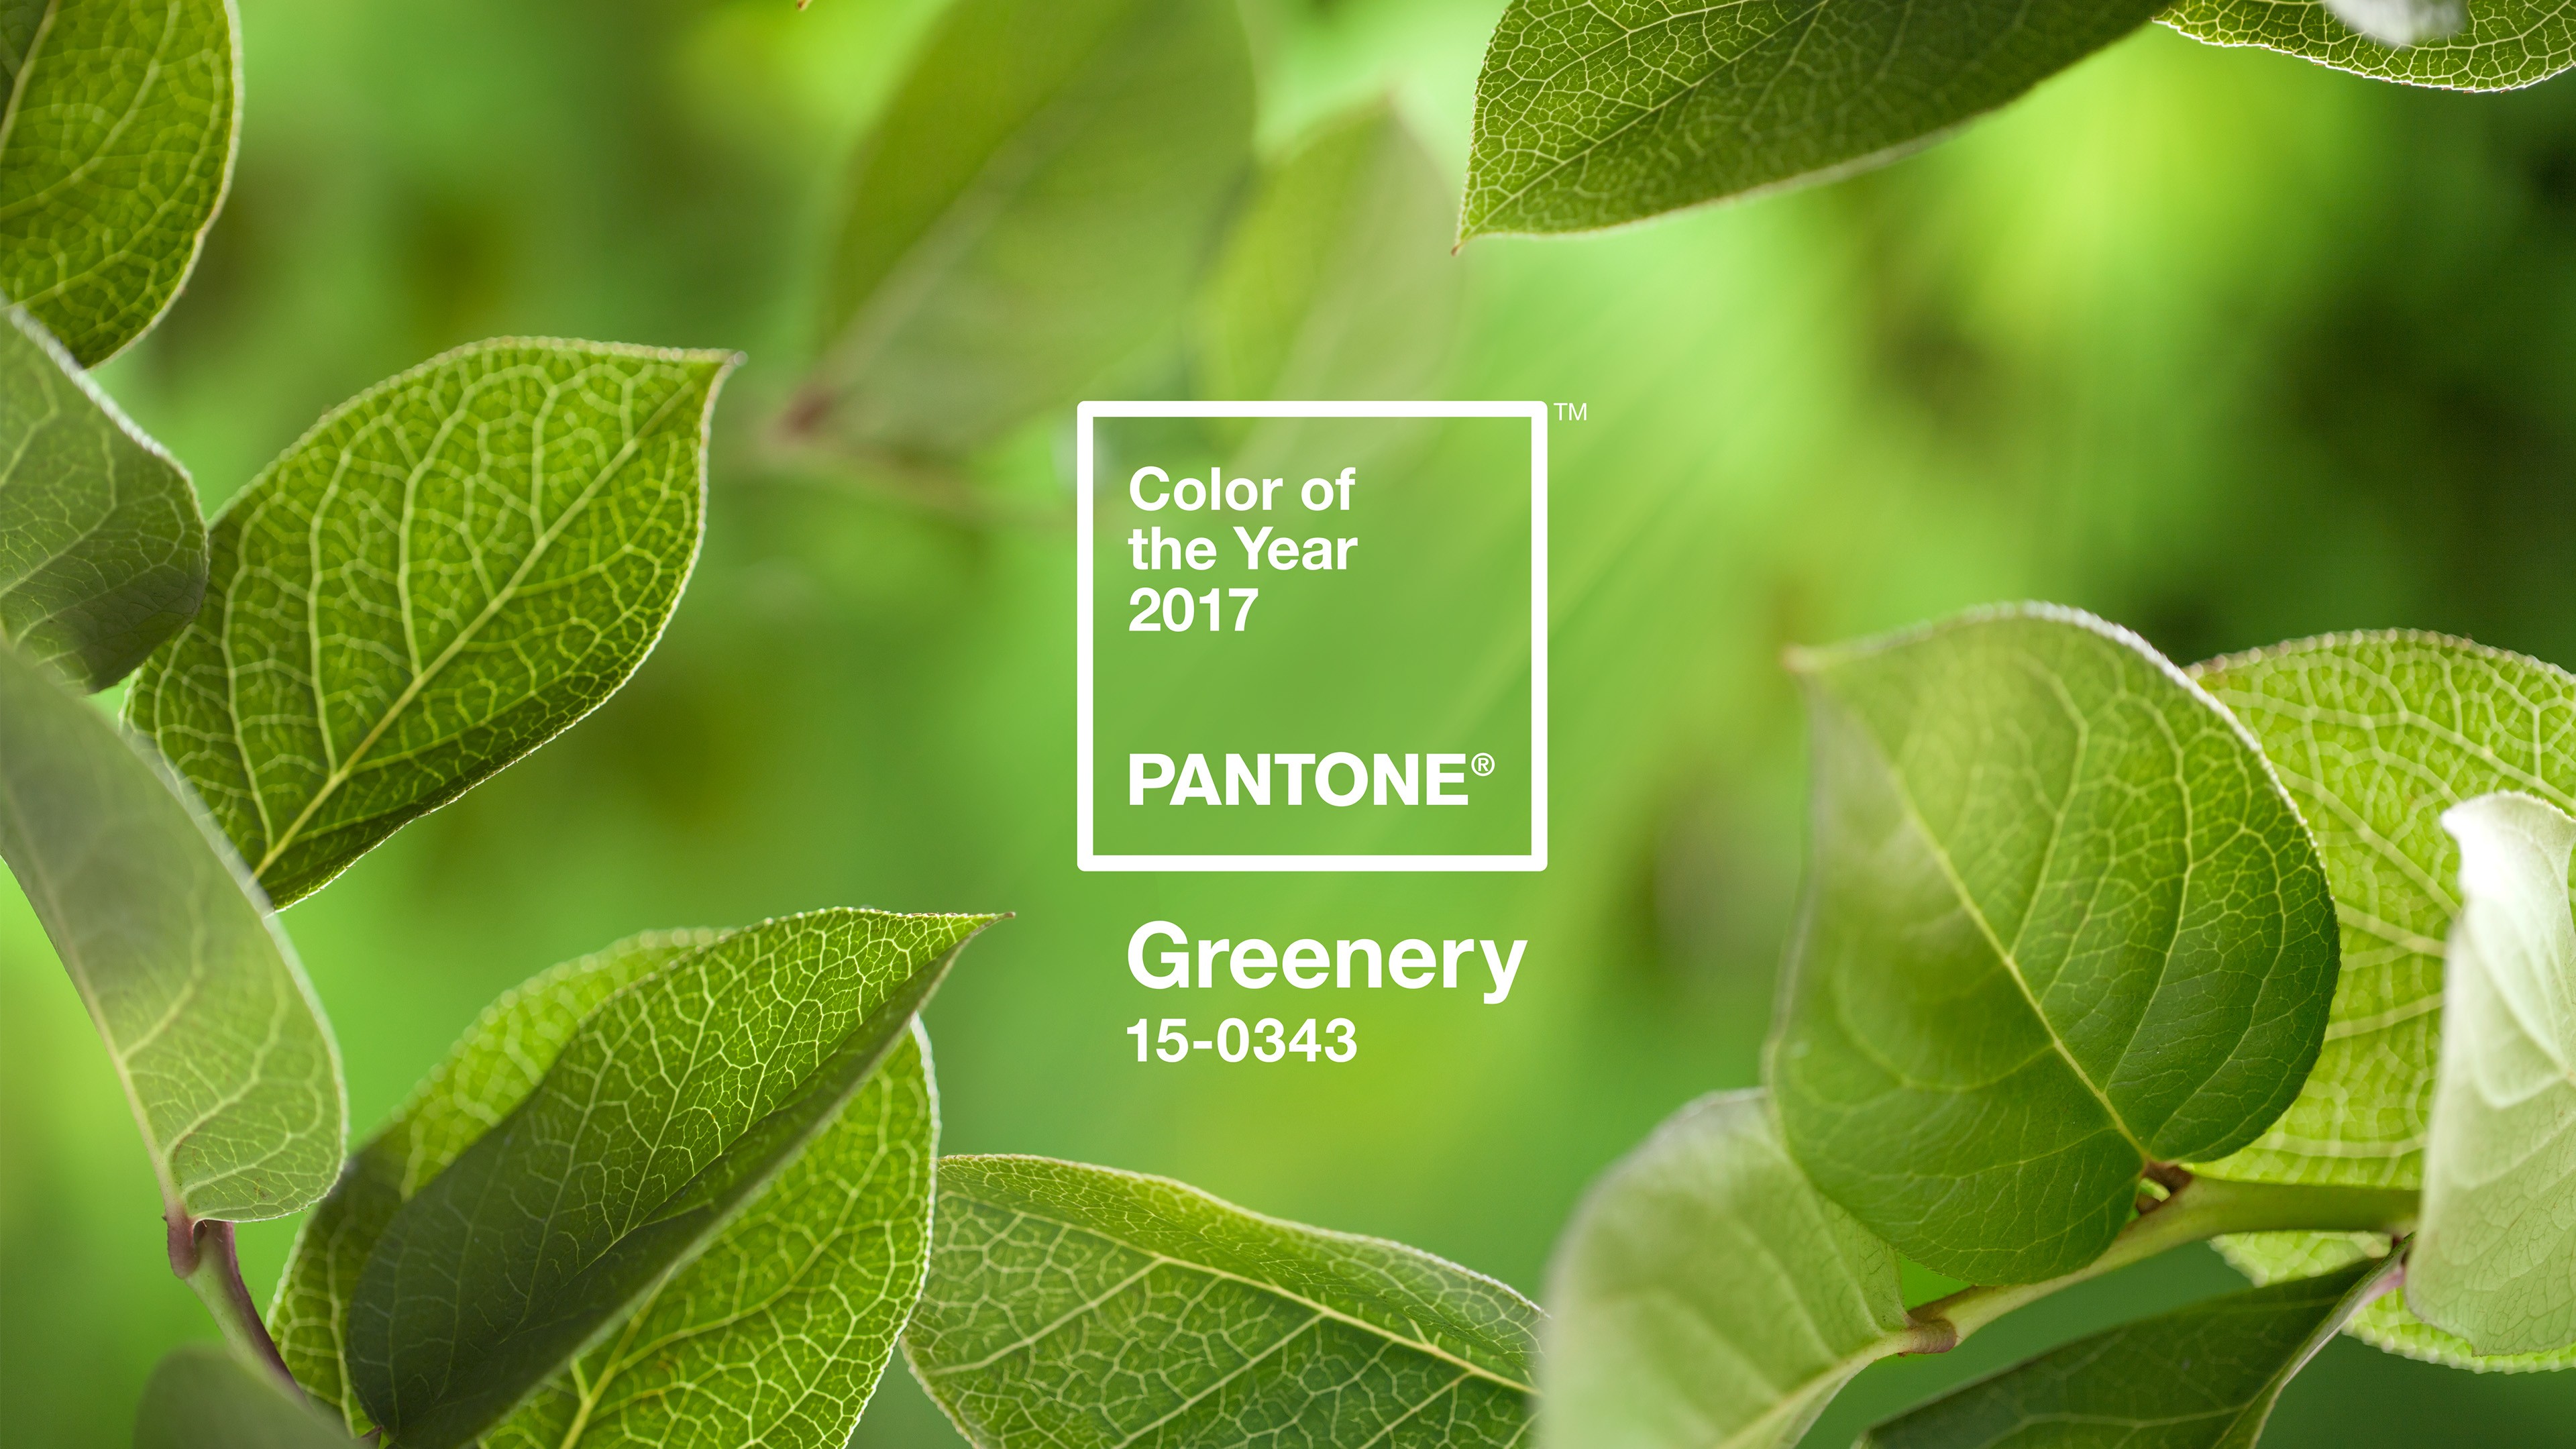 General 3840x2160 color codes green landscape colorful logo leaves trees minimalism